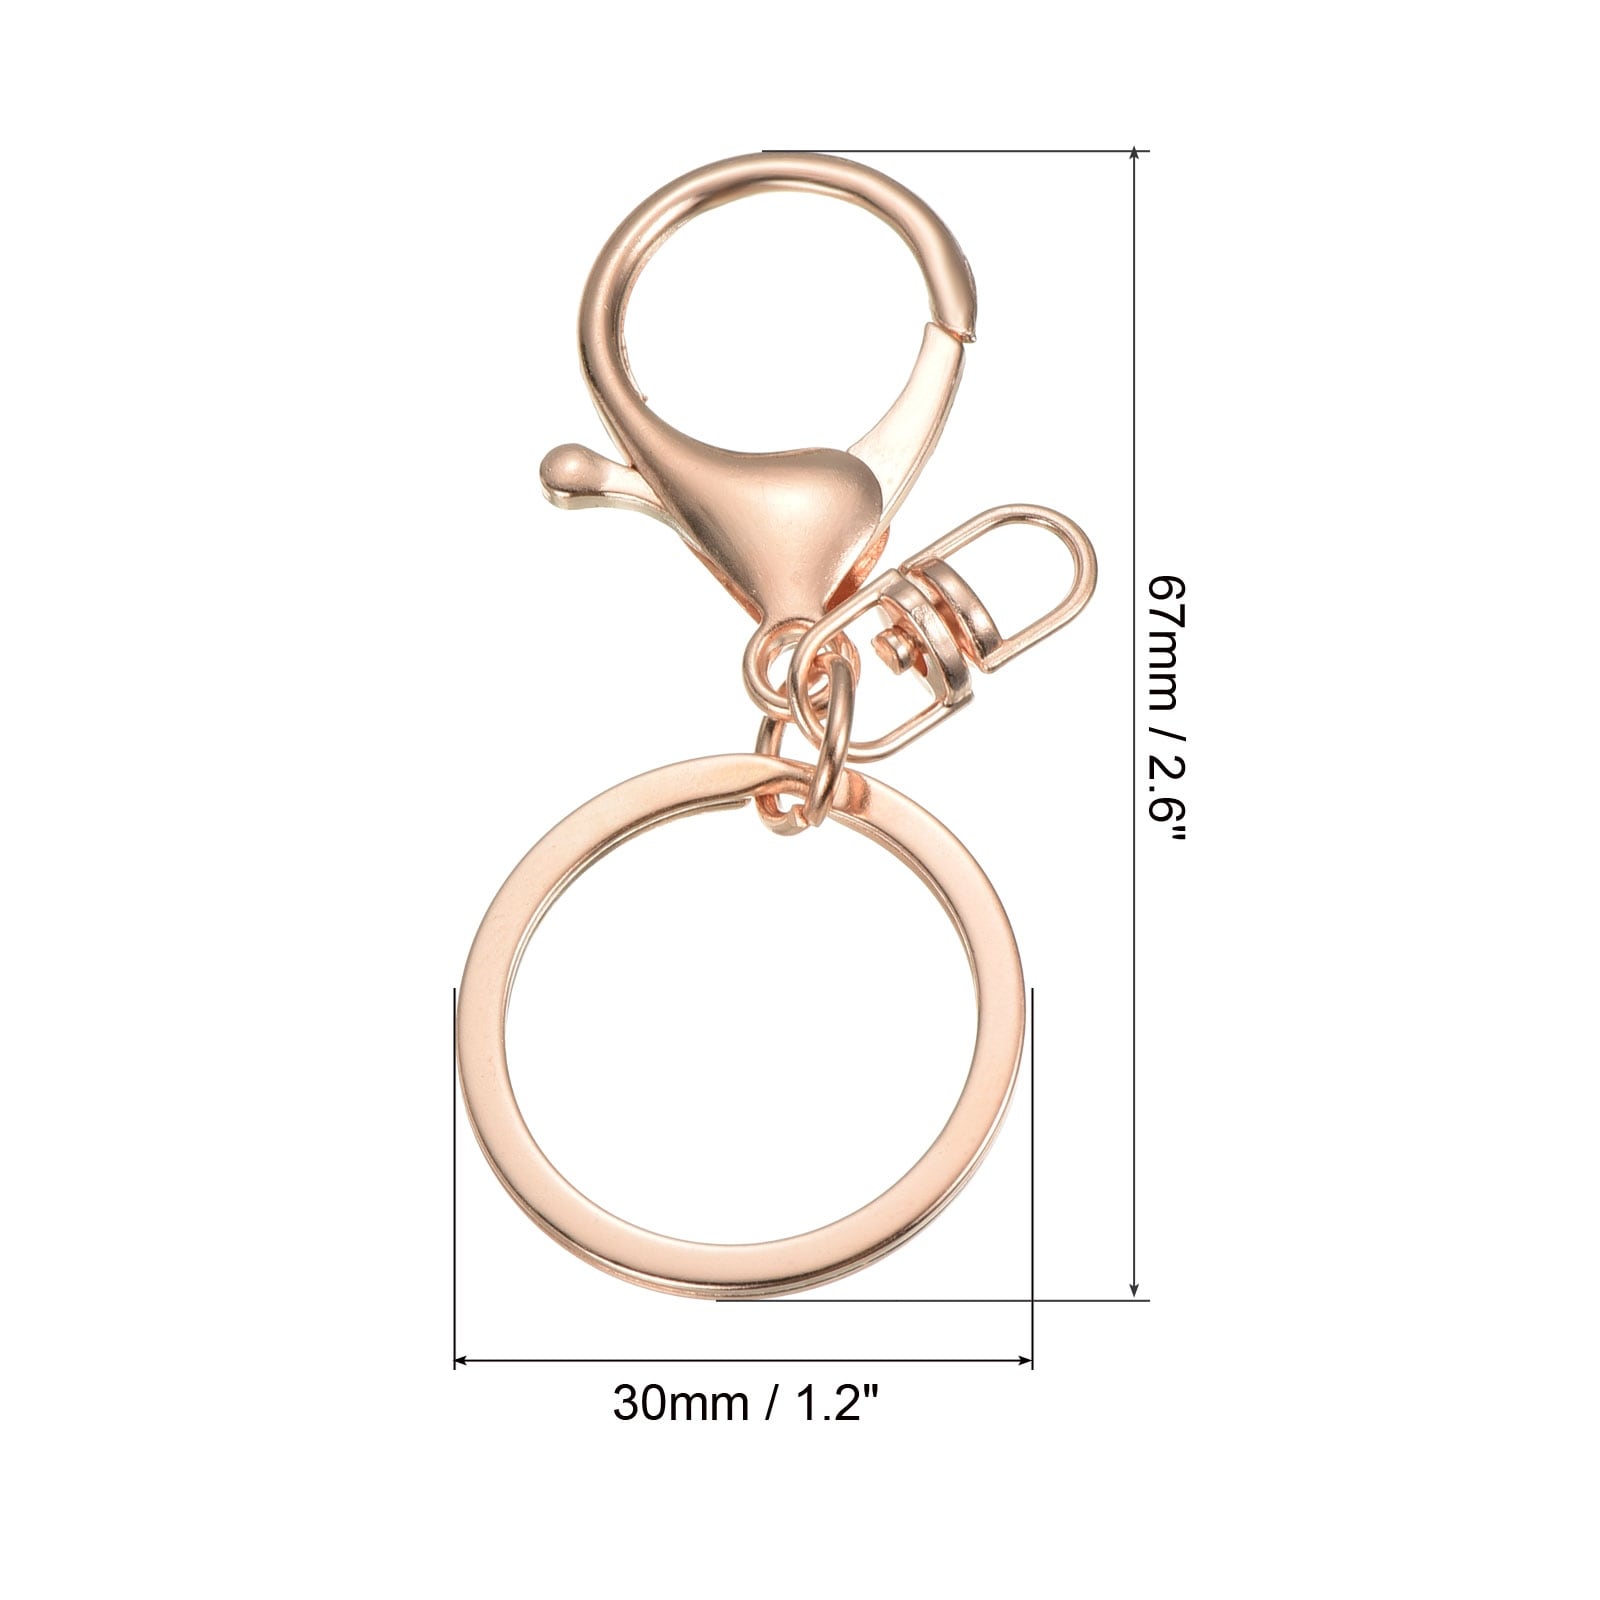 10pcs Key Chain for Keys, Lobster Claw Clasps Keychain Holder, Rose Gold